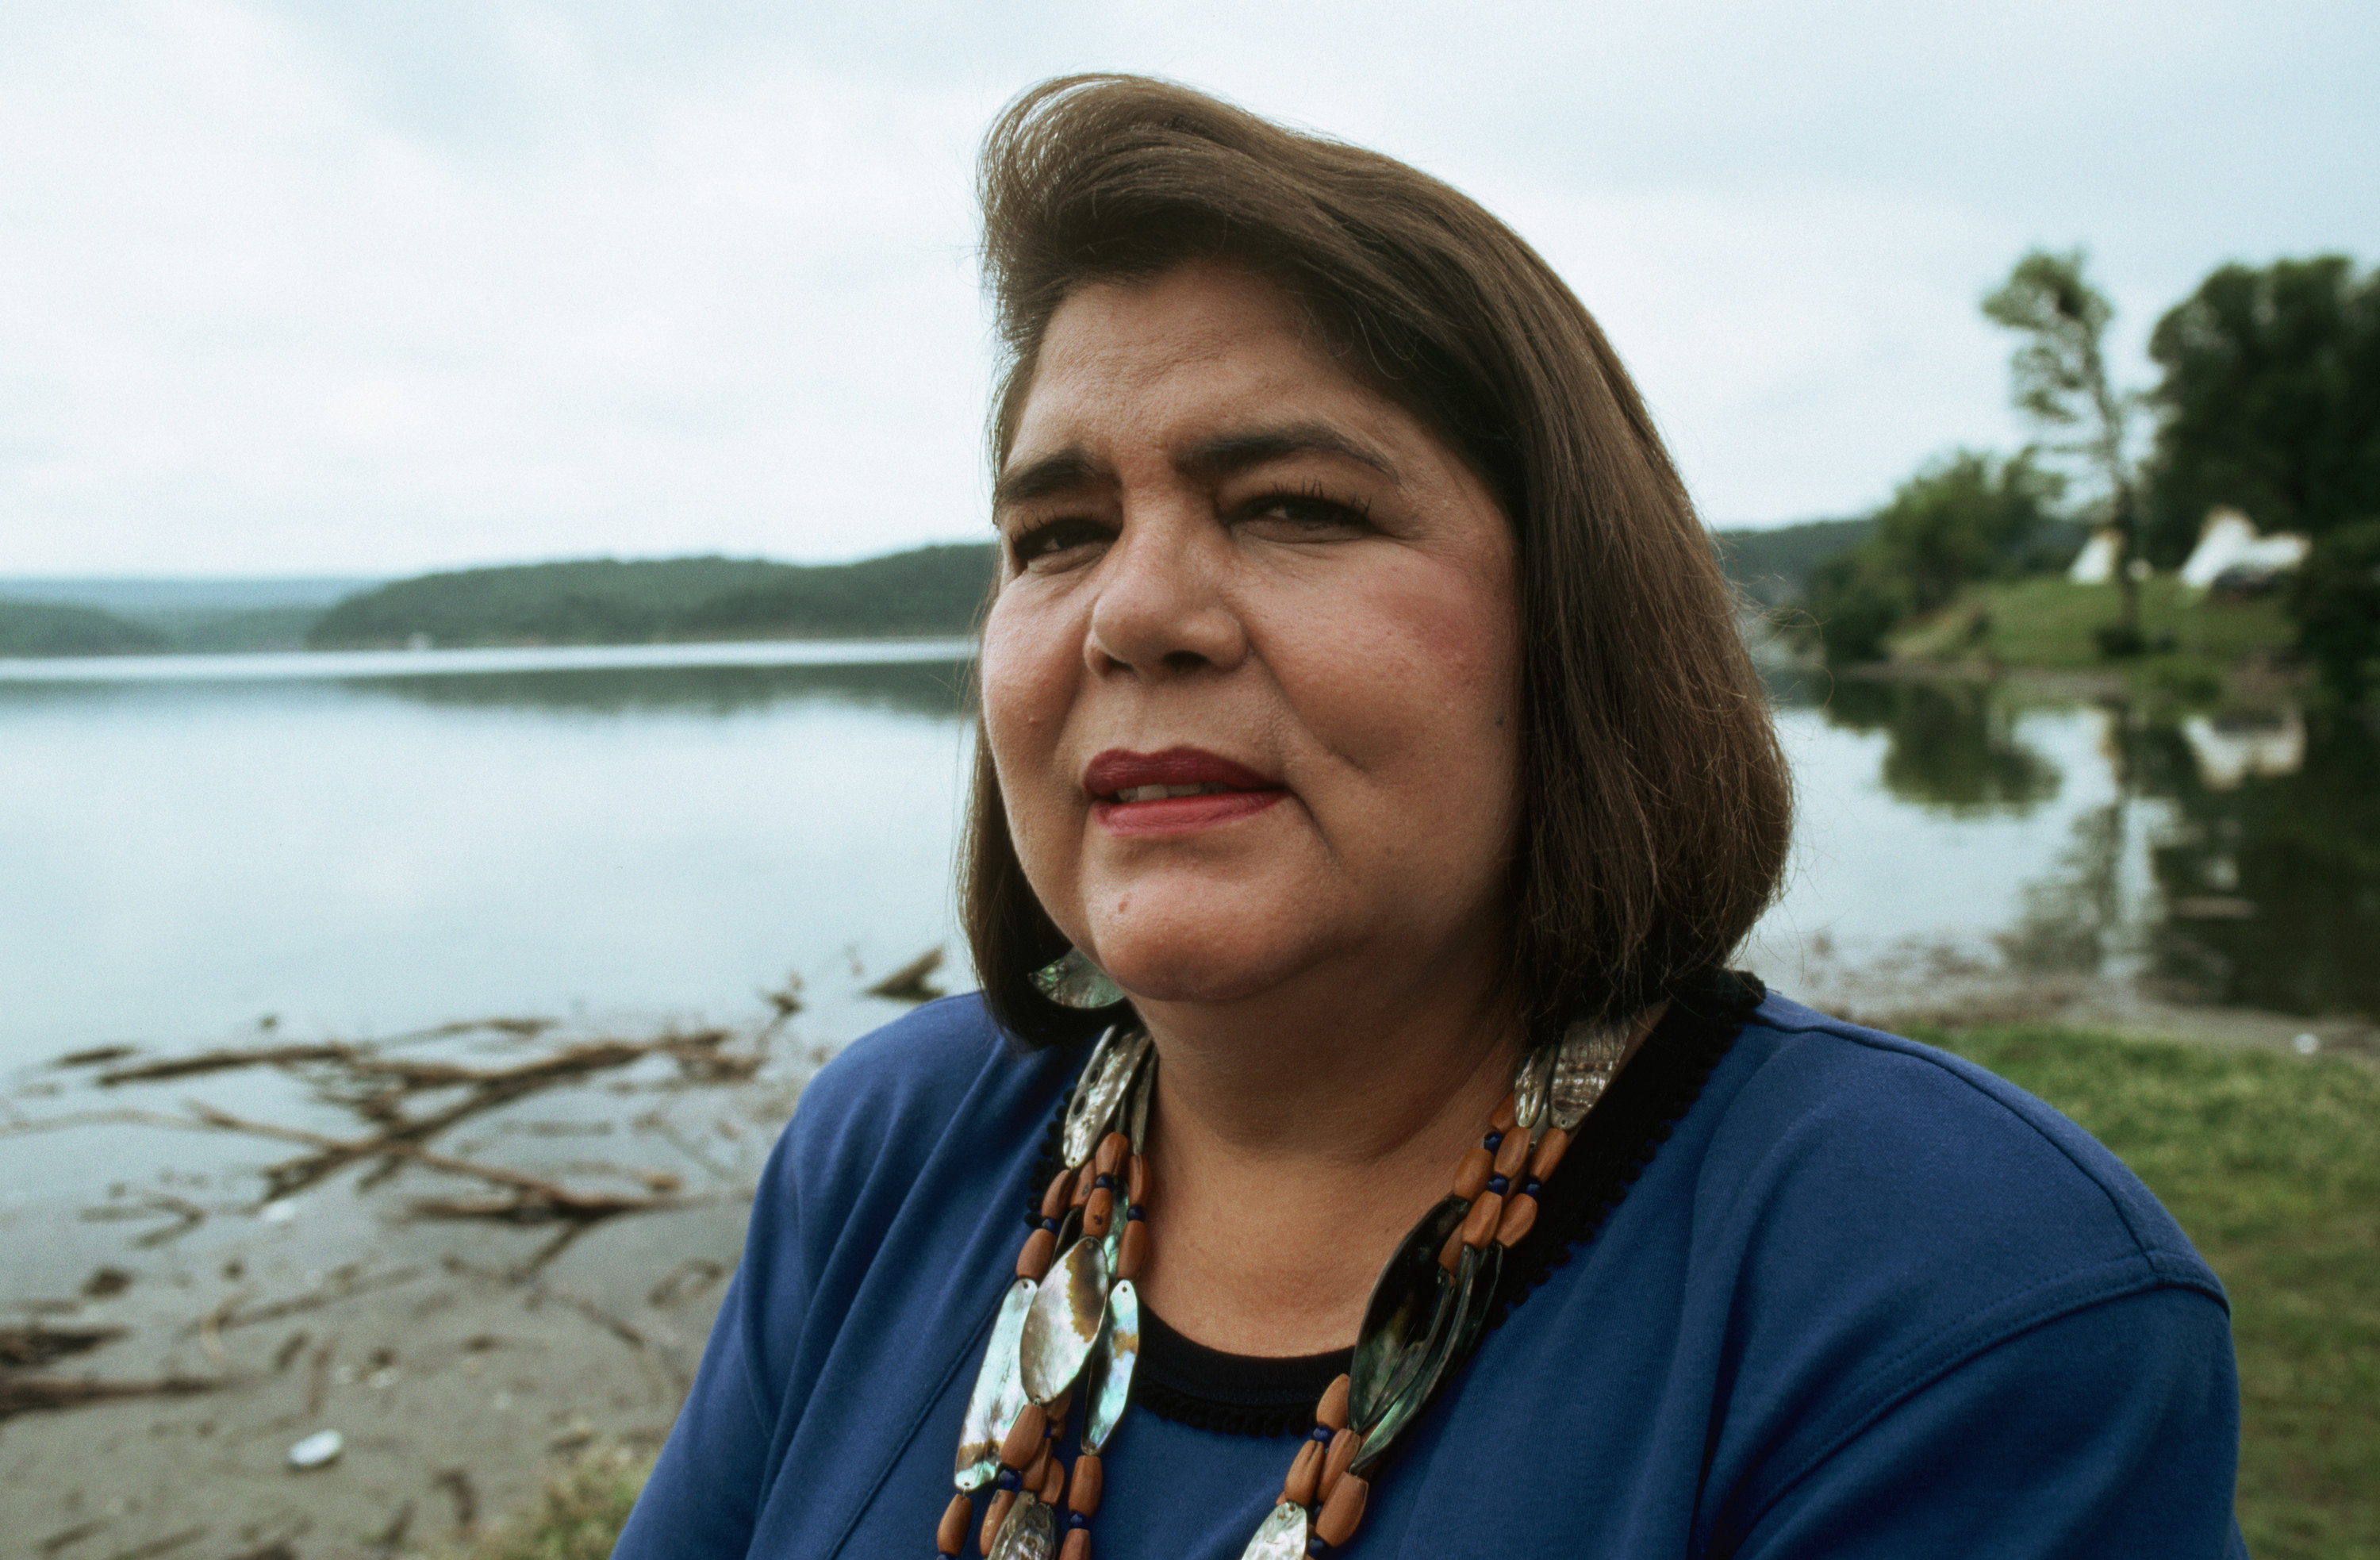 Chief Wilma Mankiller, of the Cherokee Nation standing by a lake